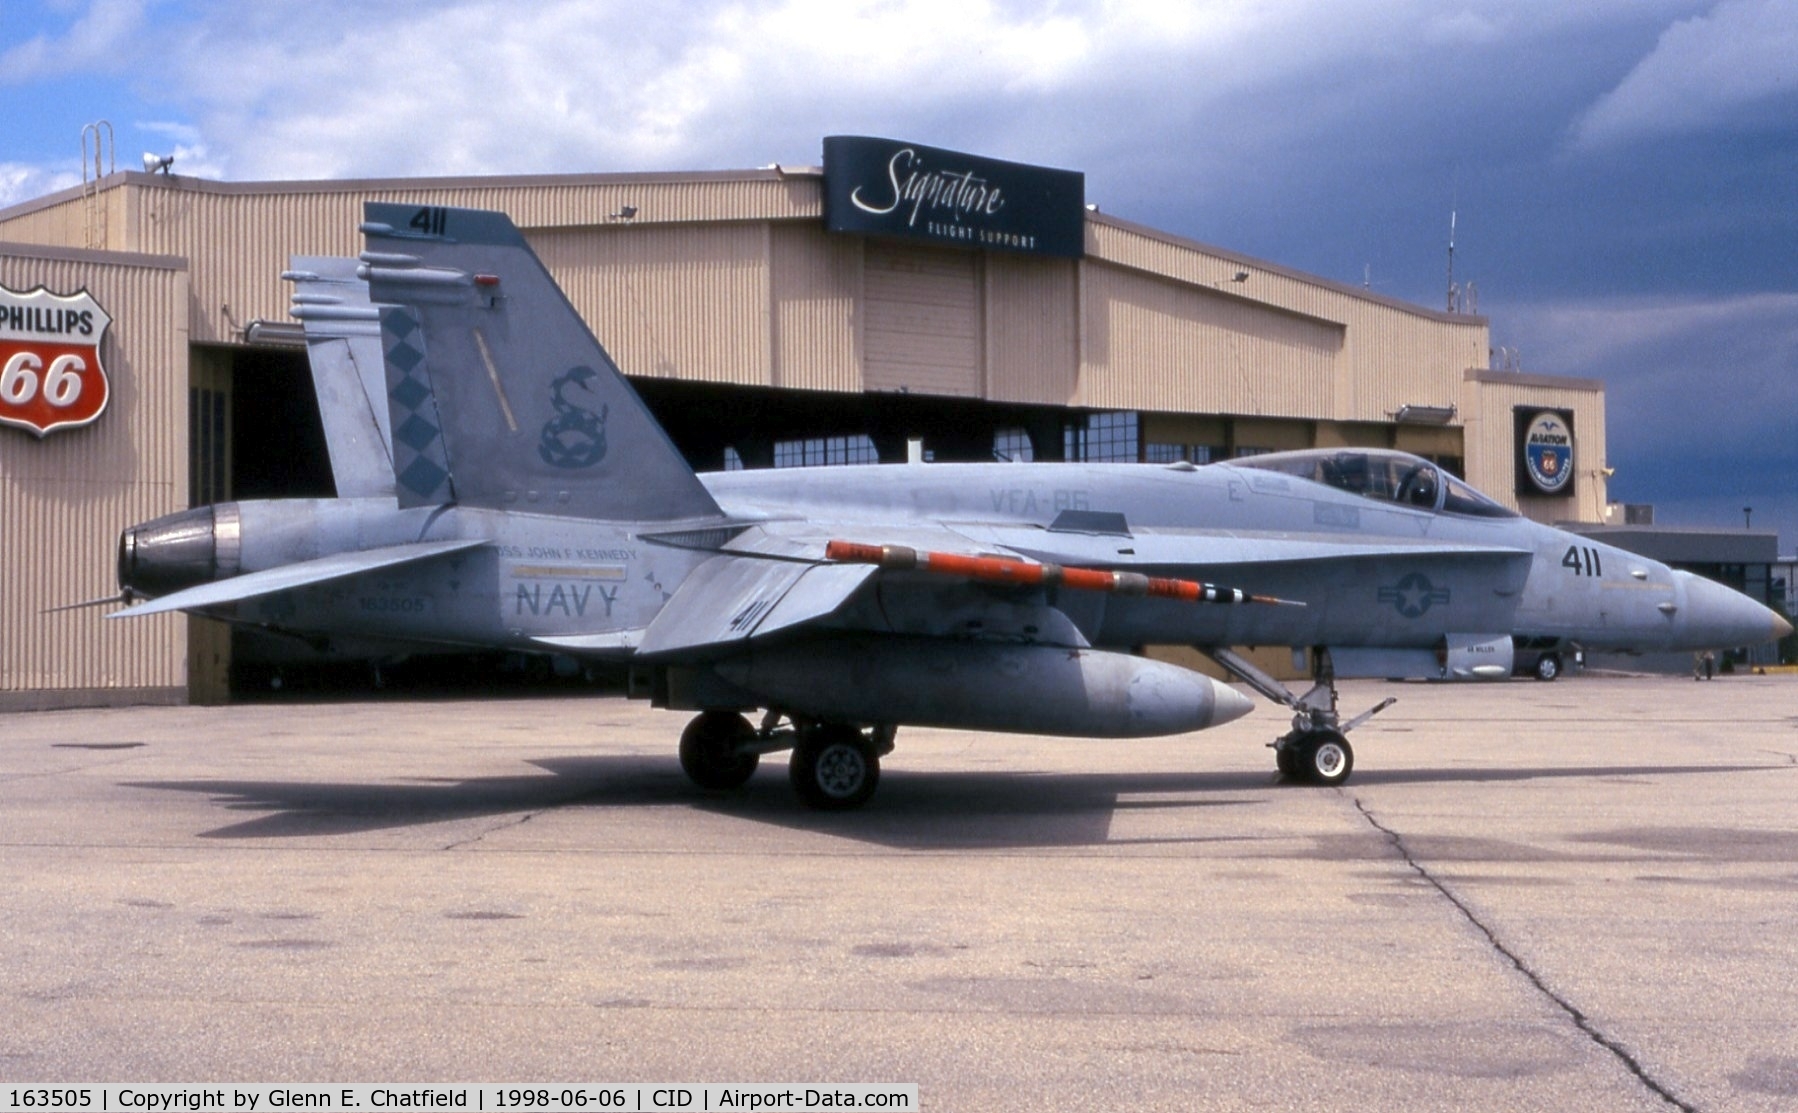 163505, 1988 McDonnell Douglas F/A-18C Hornet C/N 0749, F/A-18C Stopping over